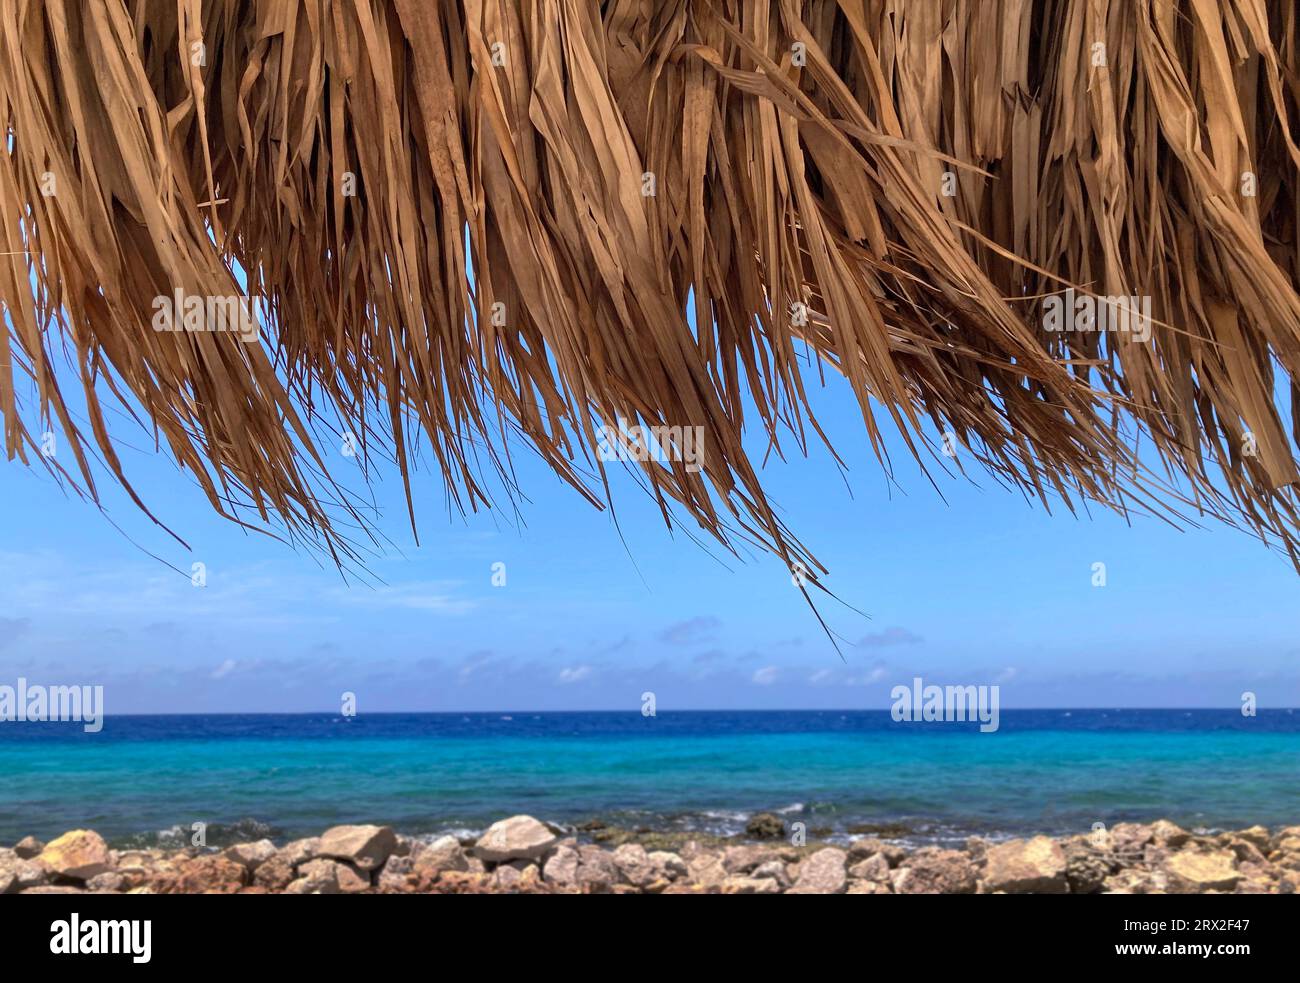 Thatched roof palm fronds blowing in the breeze with Caribbean sea, Curacao Stock Photo